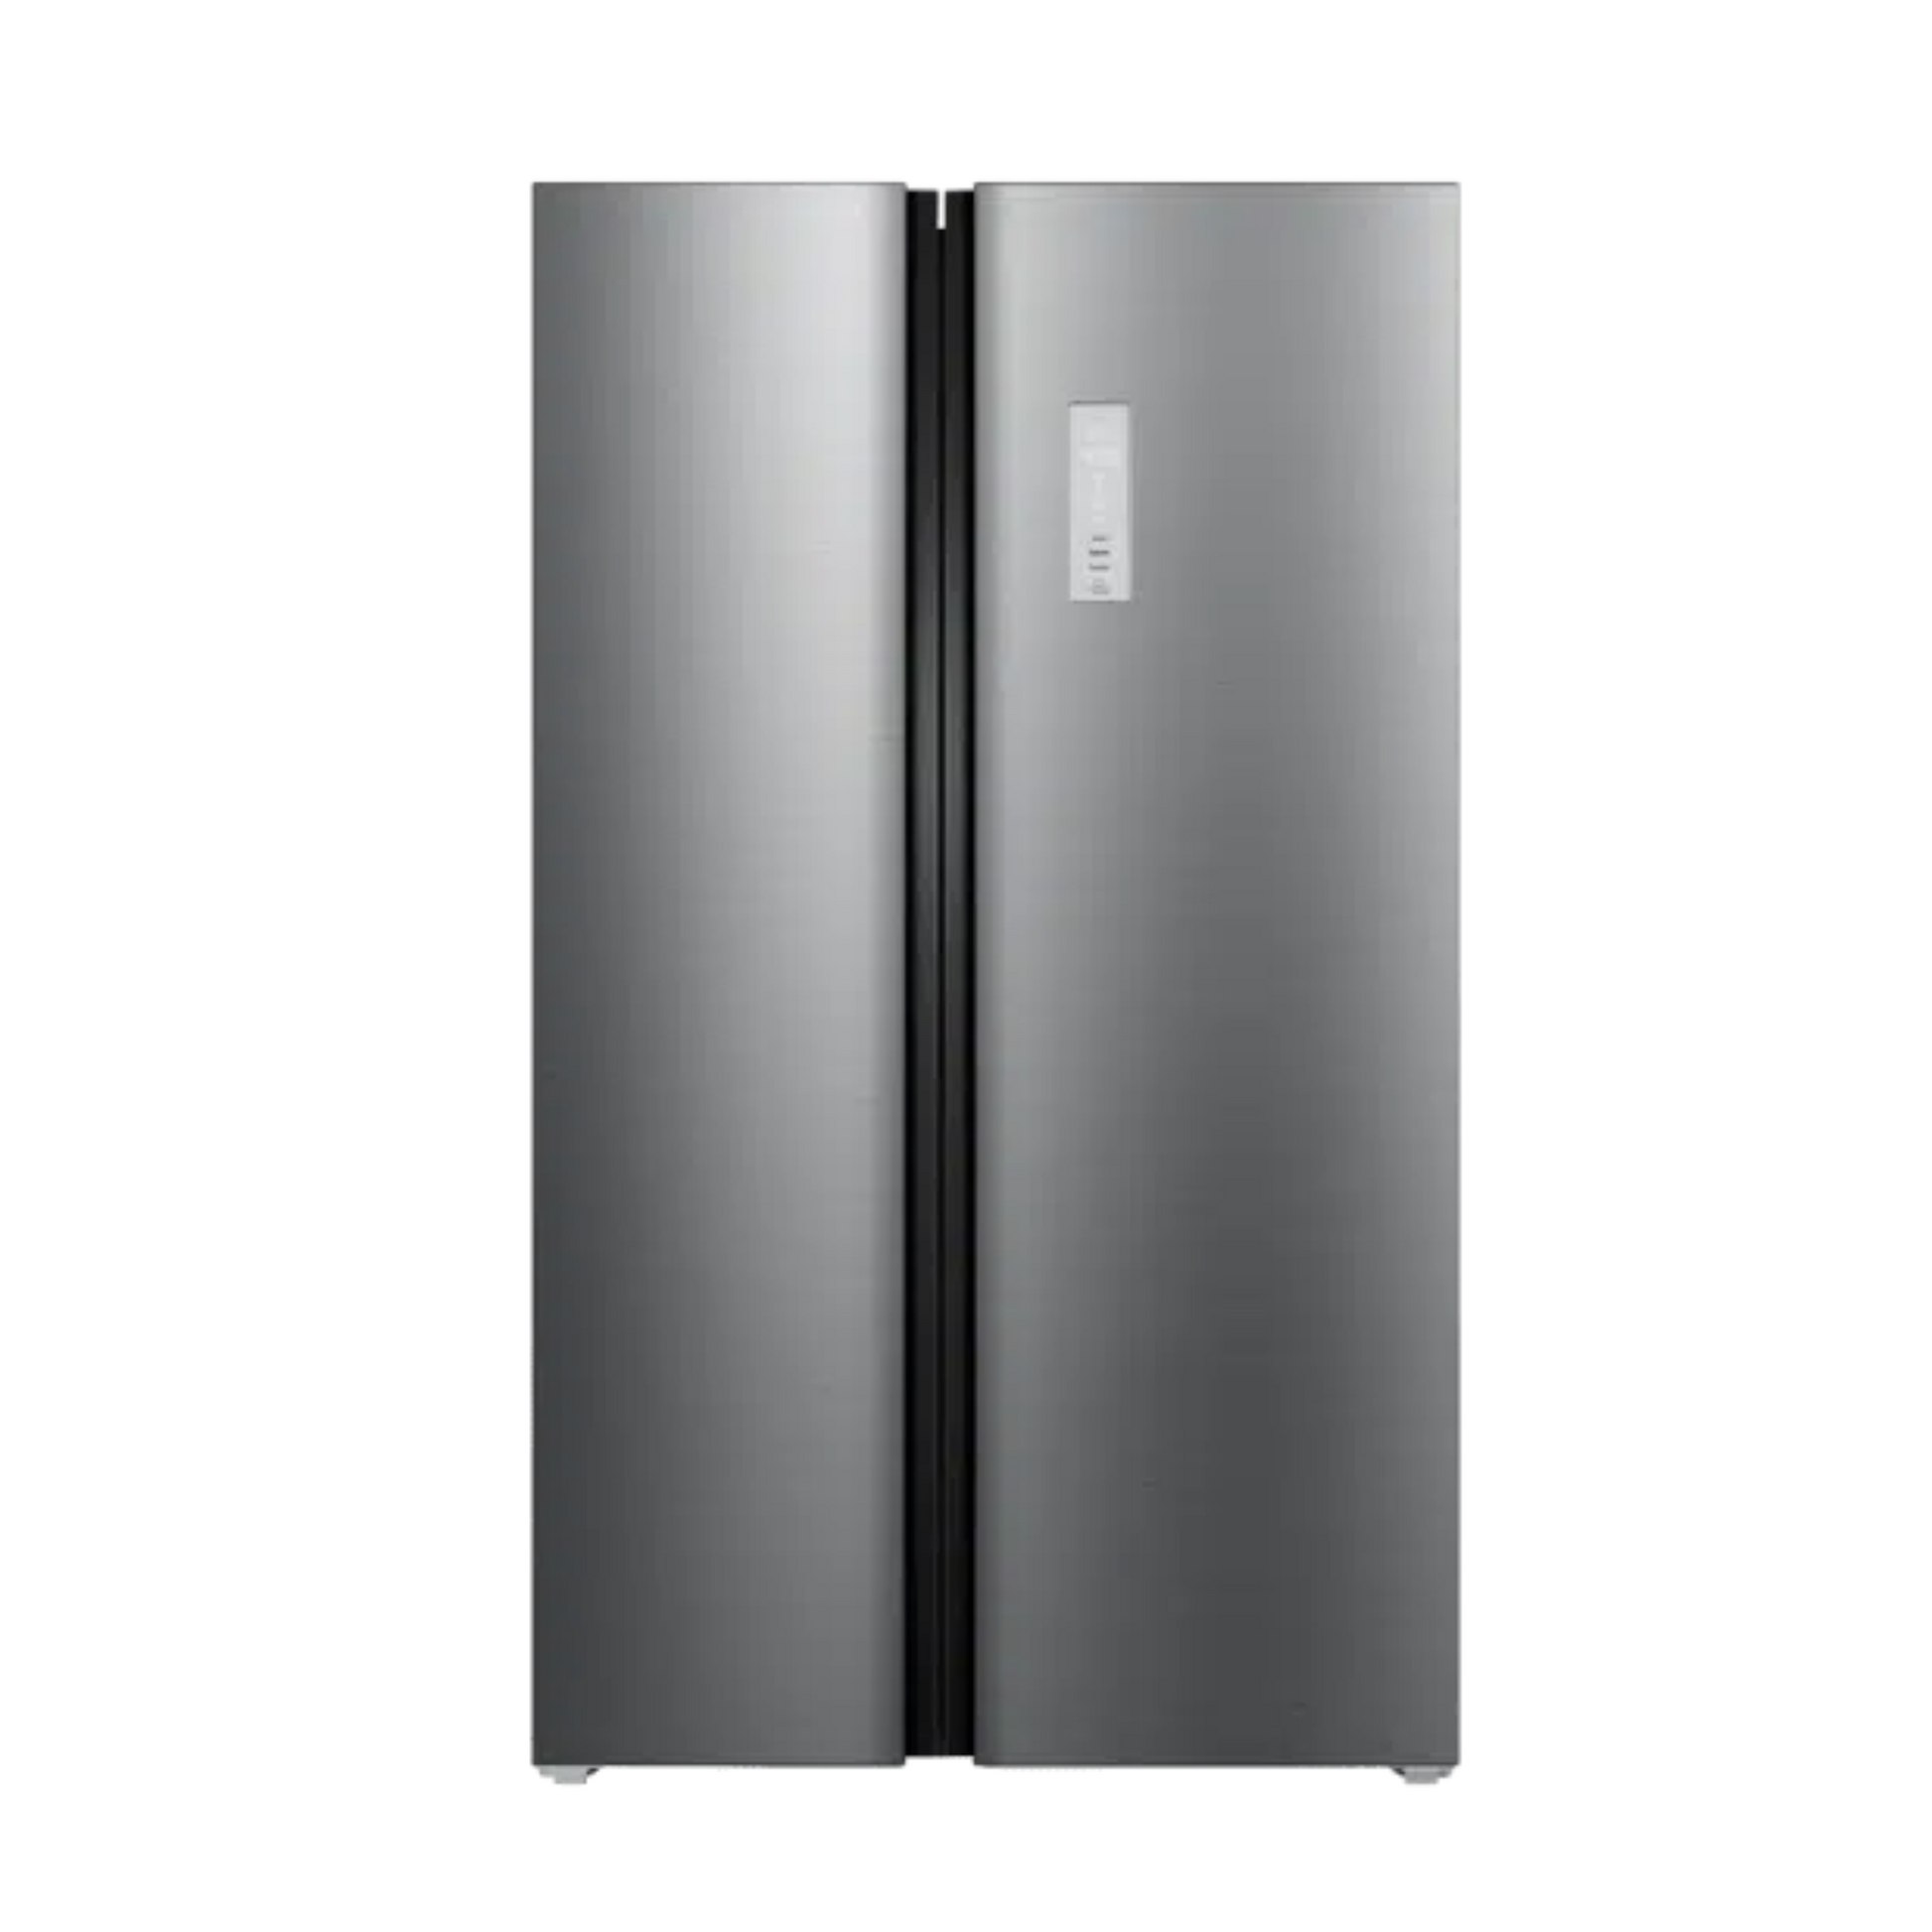 TCL 635L Eco Inverter Side by Side Refrigerator, P635SBSN